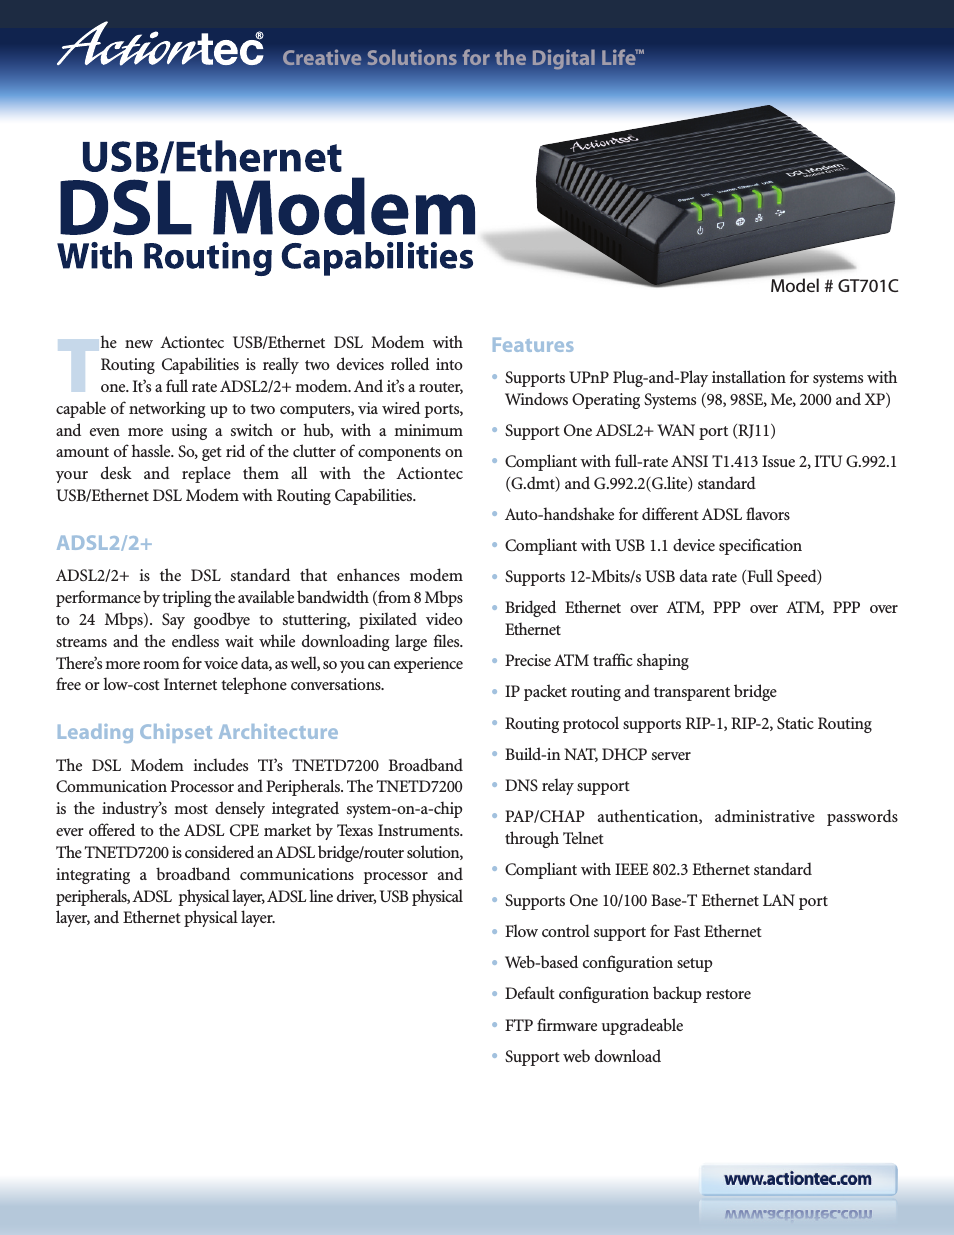 Actiontec USB/Ethernet DSL Modem with Routing Capabilities GT701C